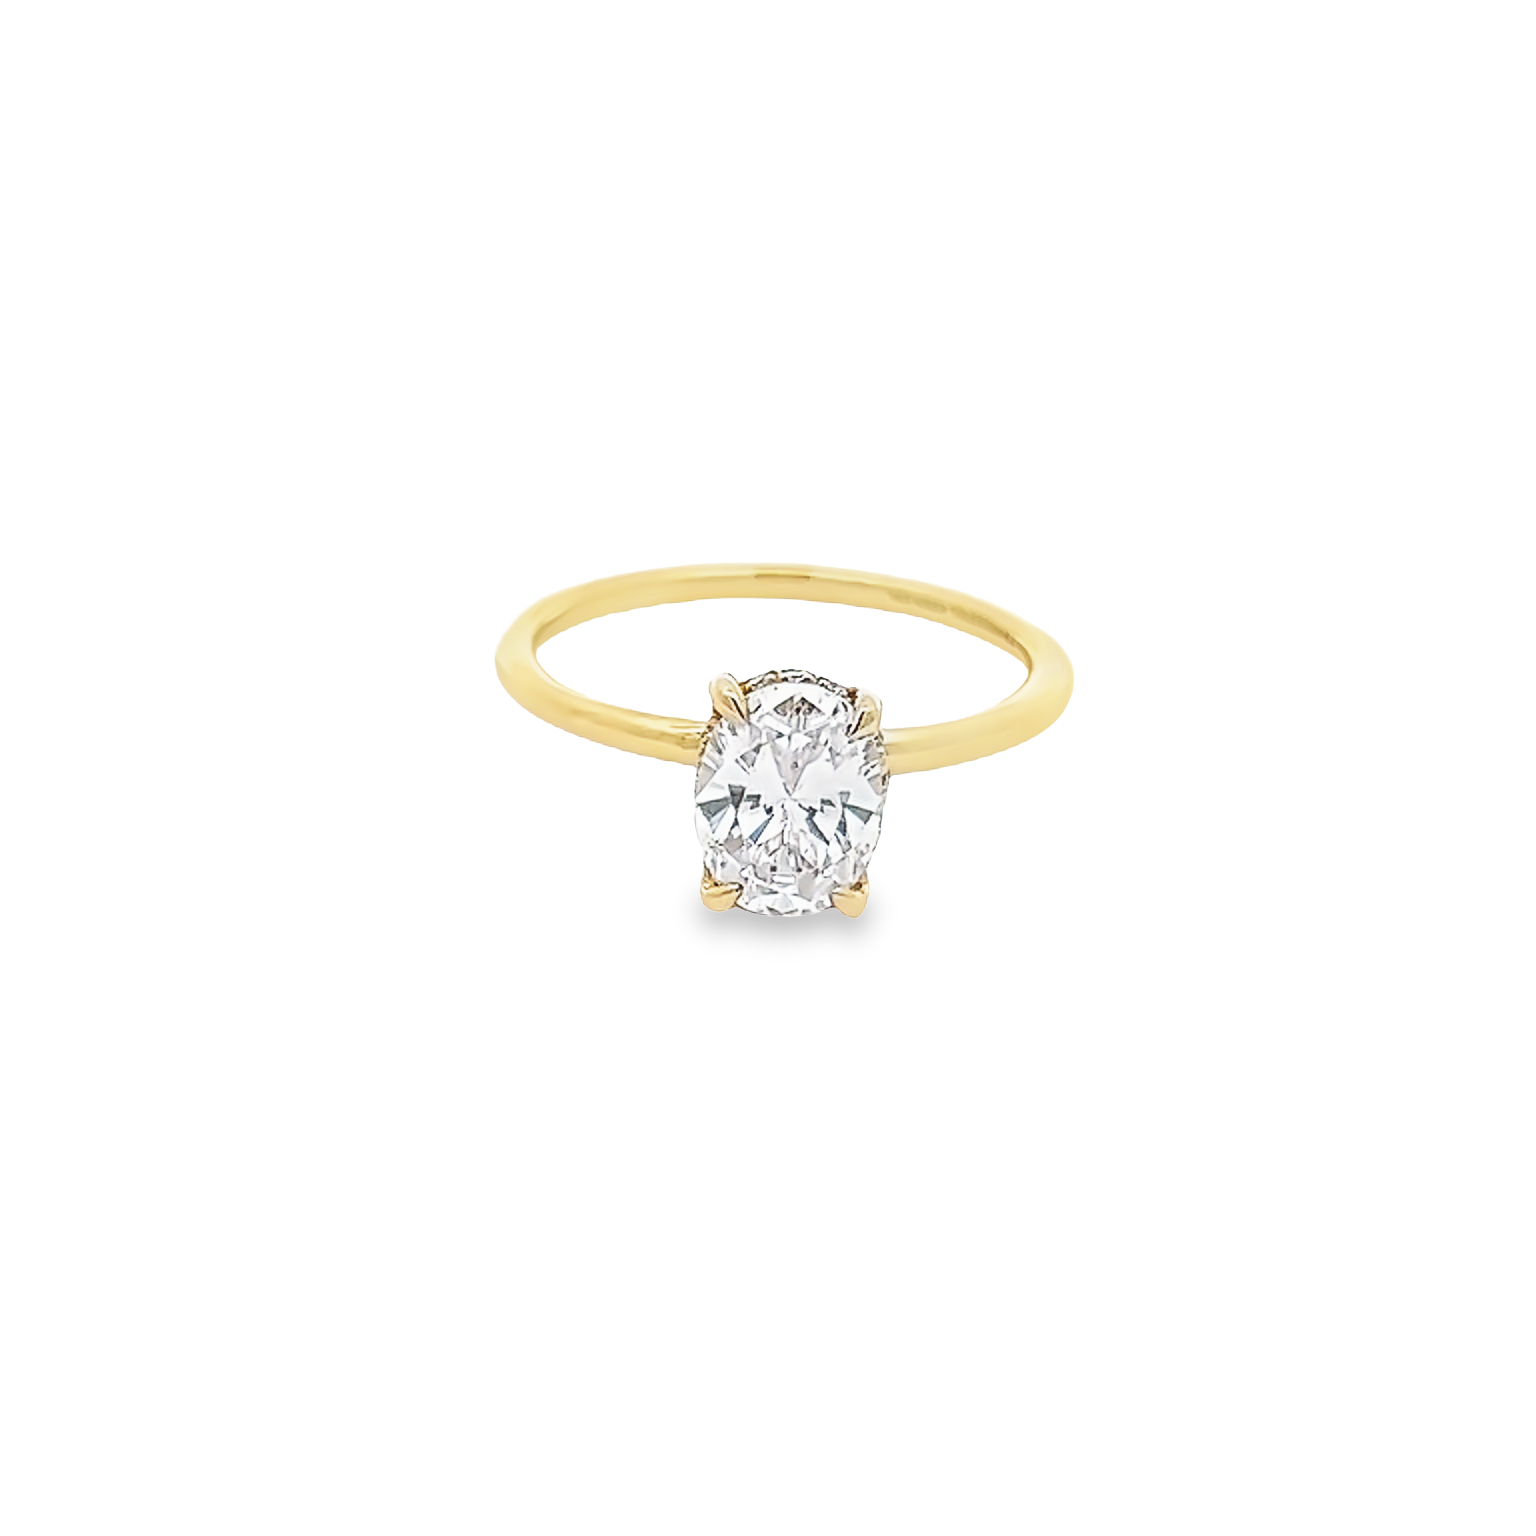 14 Karat yellow gold hidden halo semi mount engagement ring with 14=0.09 total weight round brilliant G VS Diamonds. Size 7